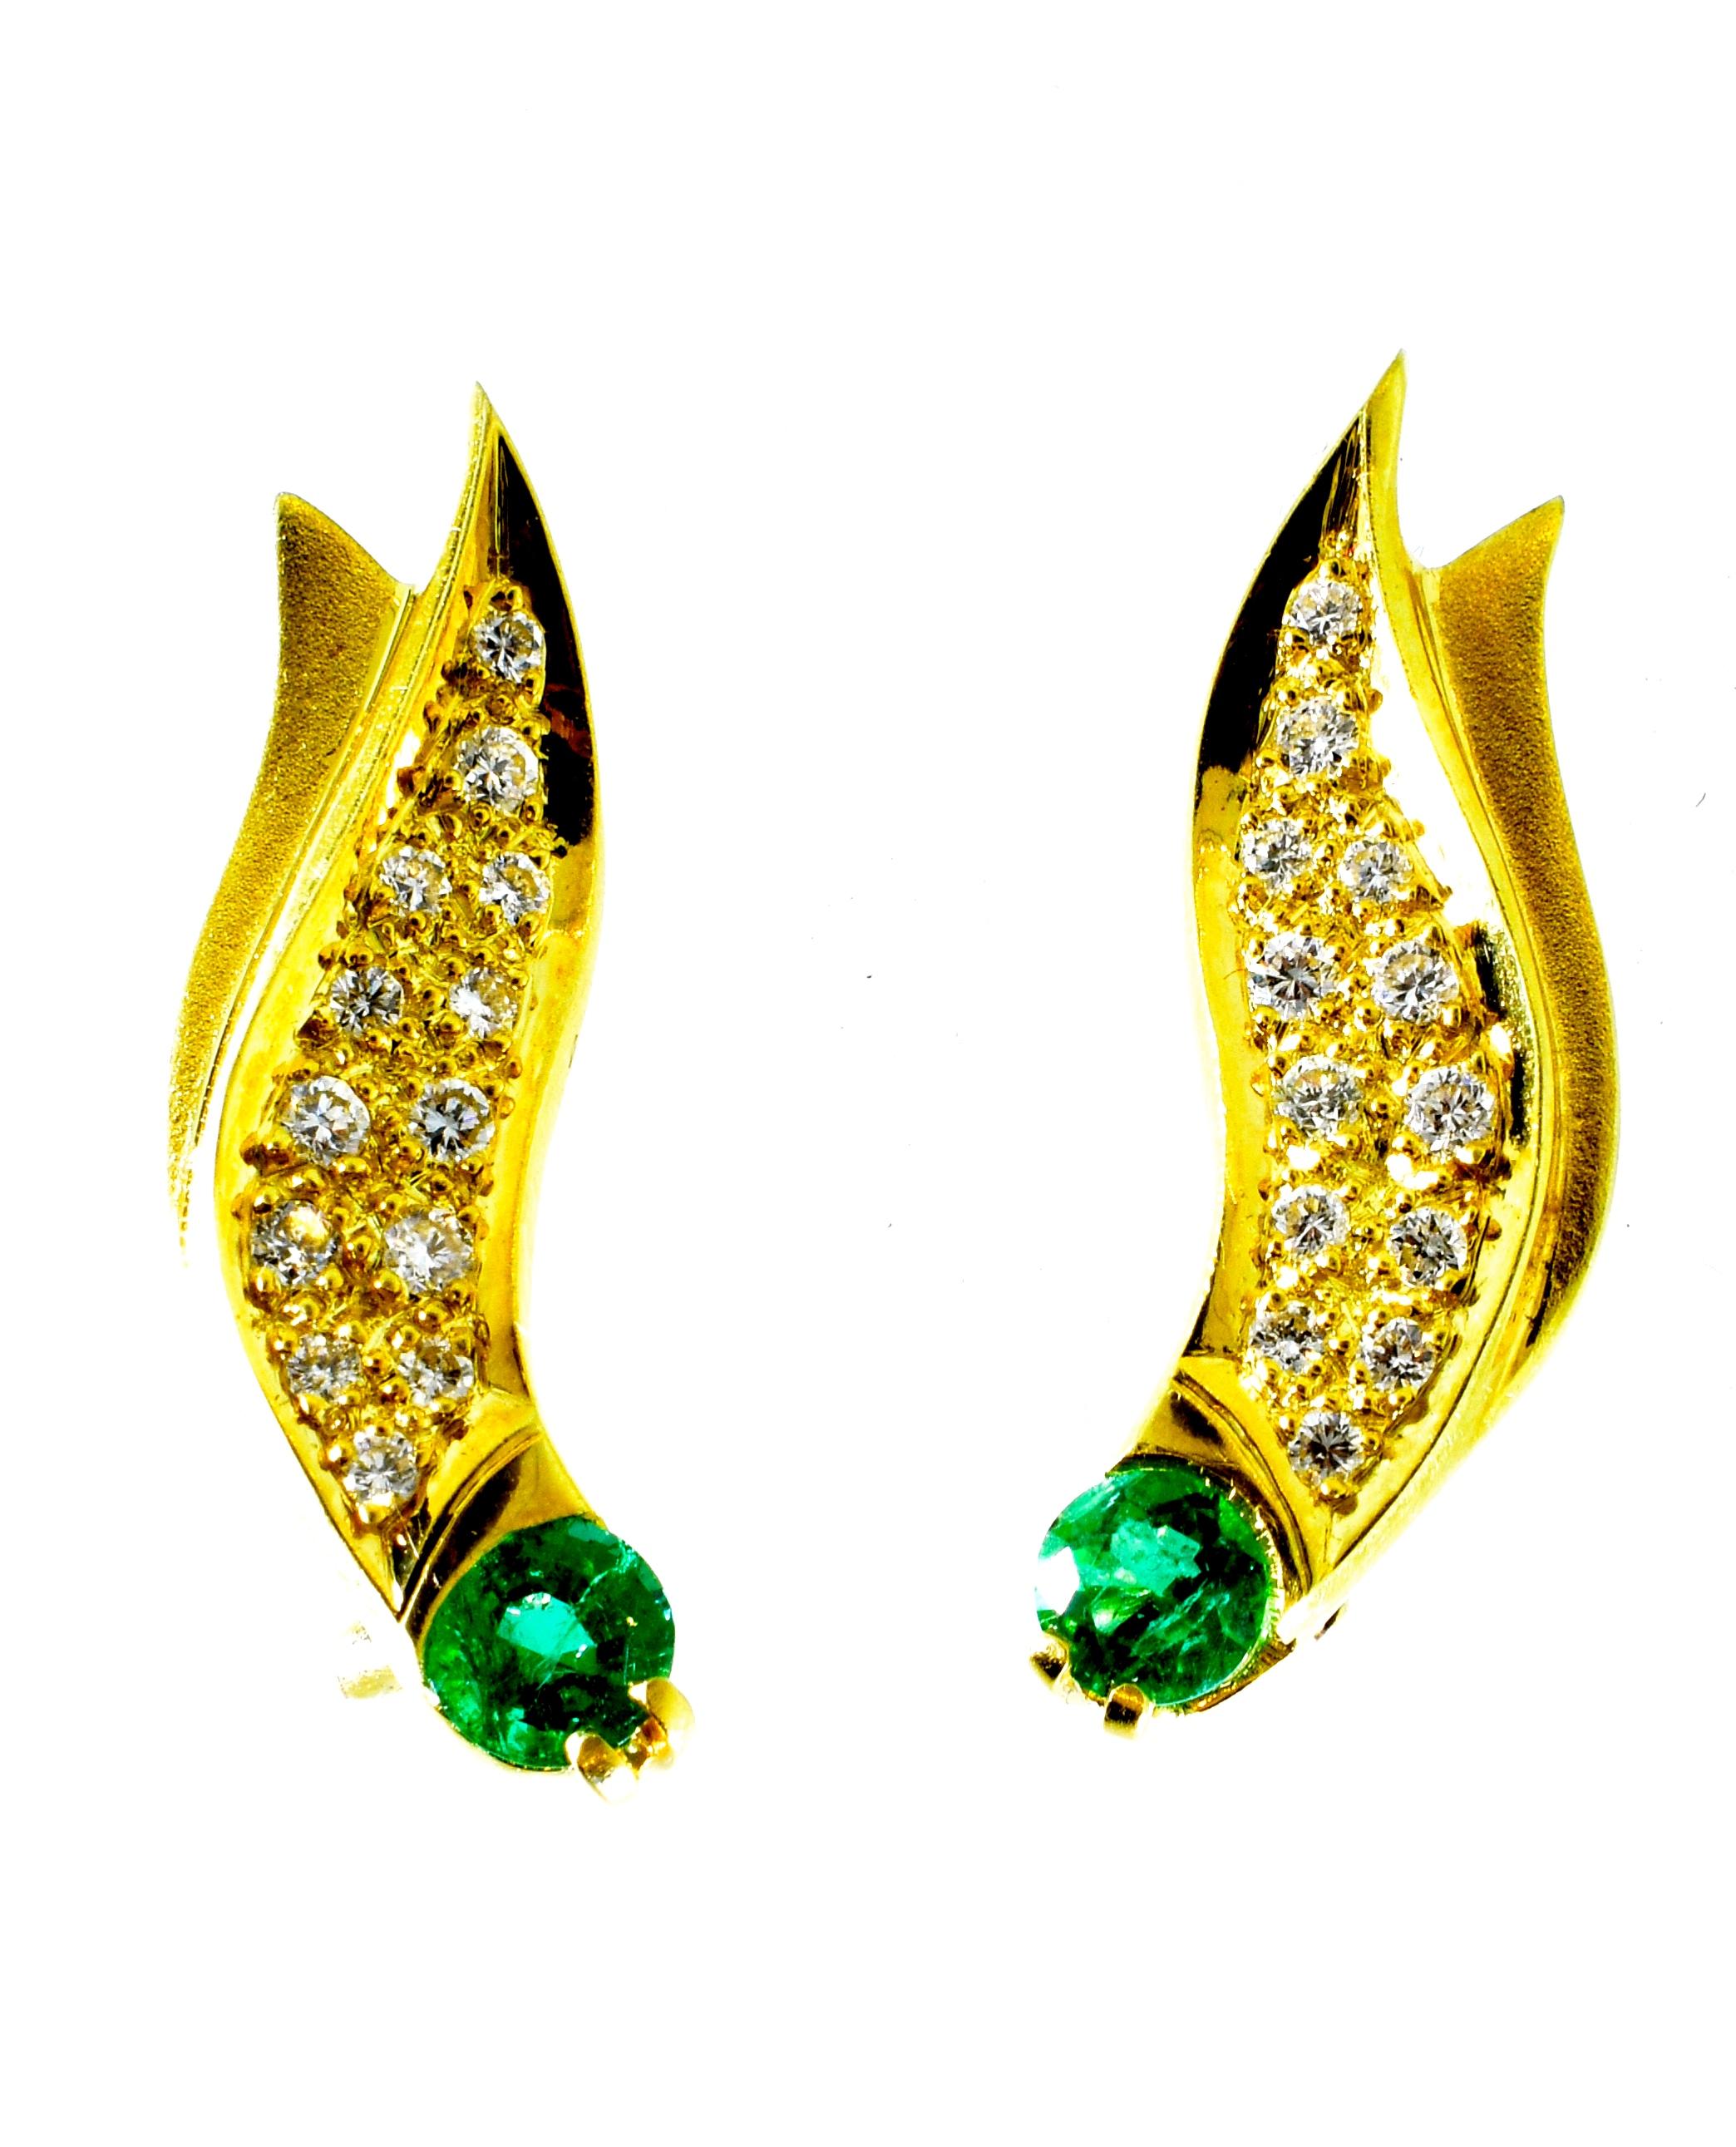 Emeralds, prong set in an 18K yellow gold flame like motif.  There are 26 fine white round brilliant cut diamonds weighing an estimated .50 cts.  These well matched and well cut diamonds are H in color (near colorless), and very slightly included